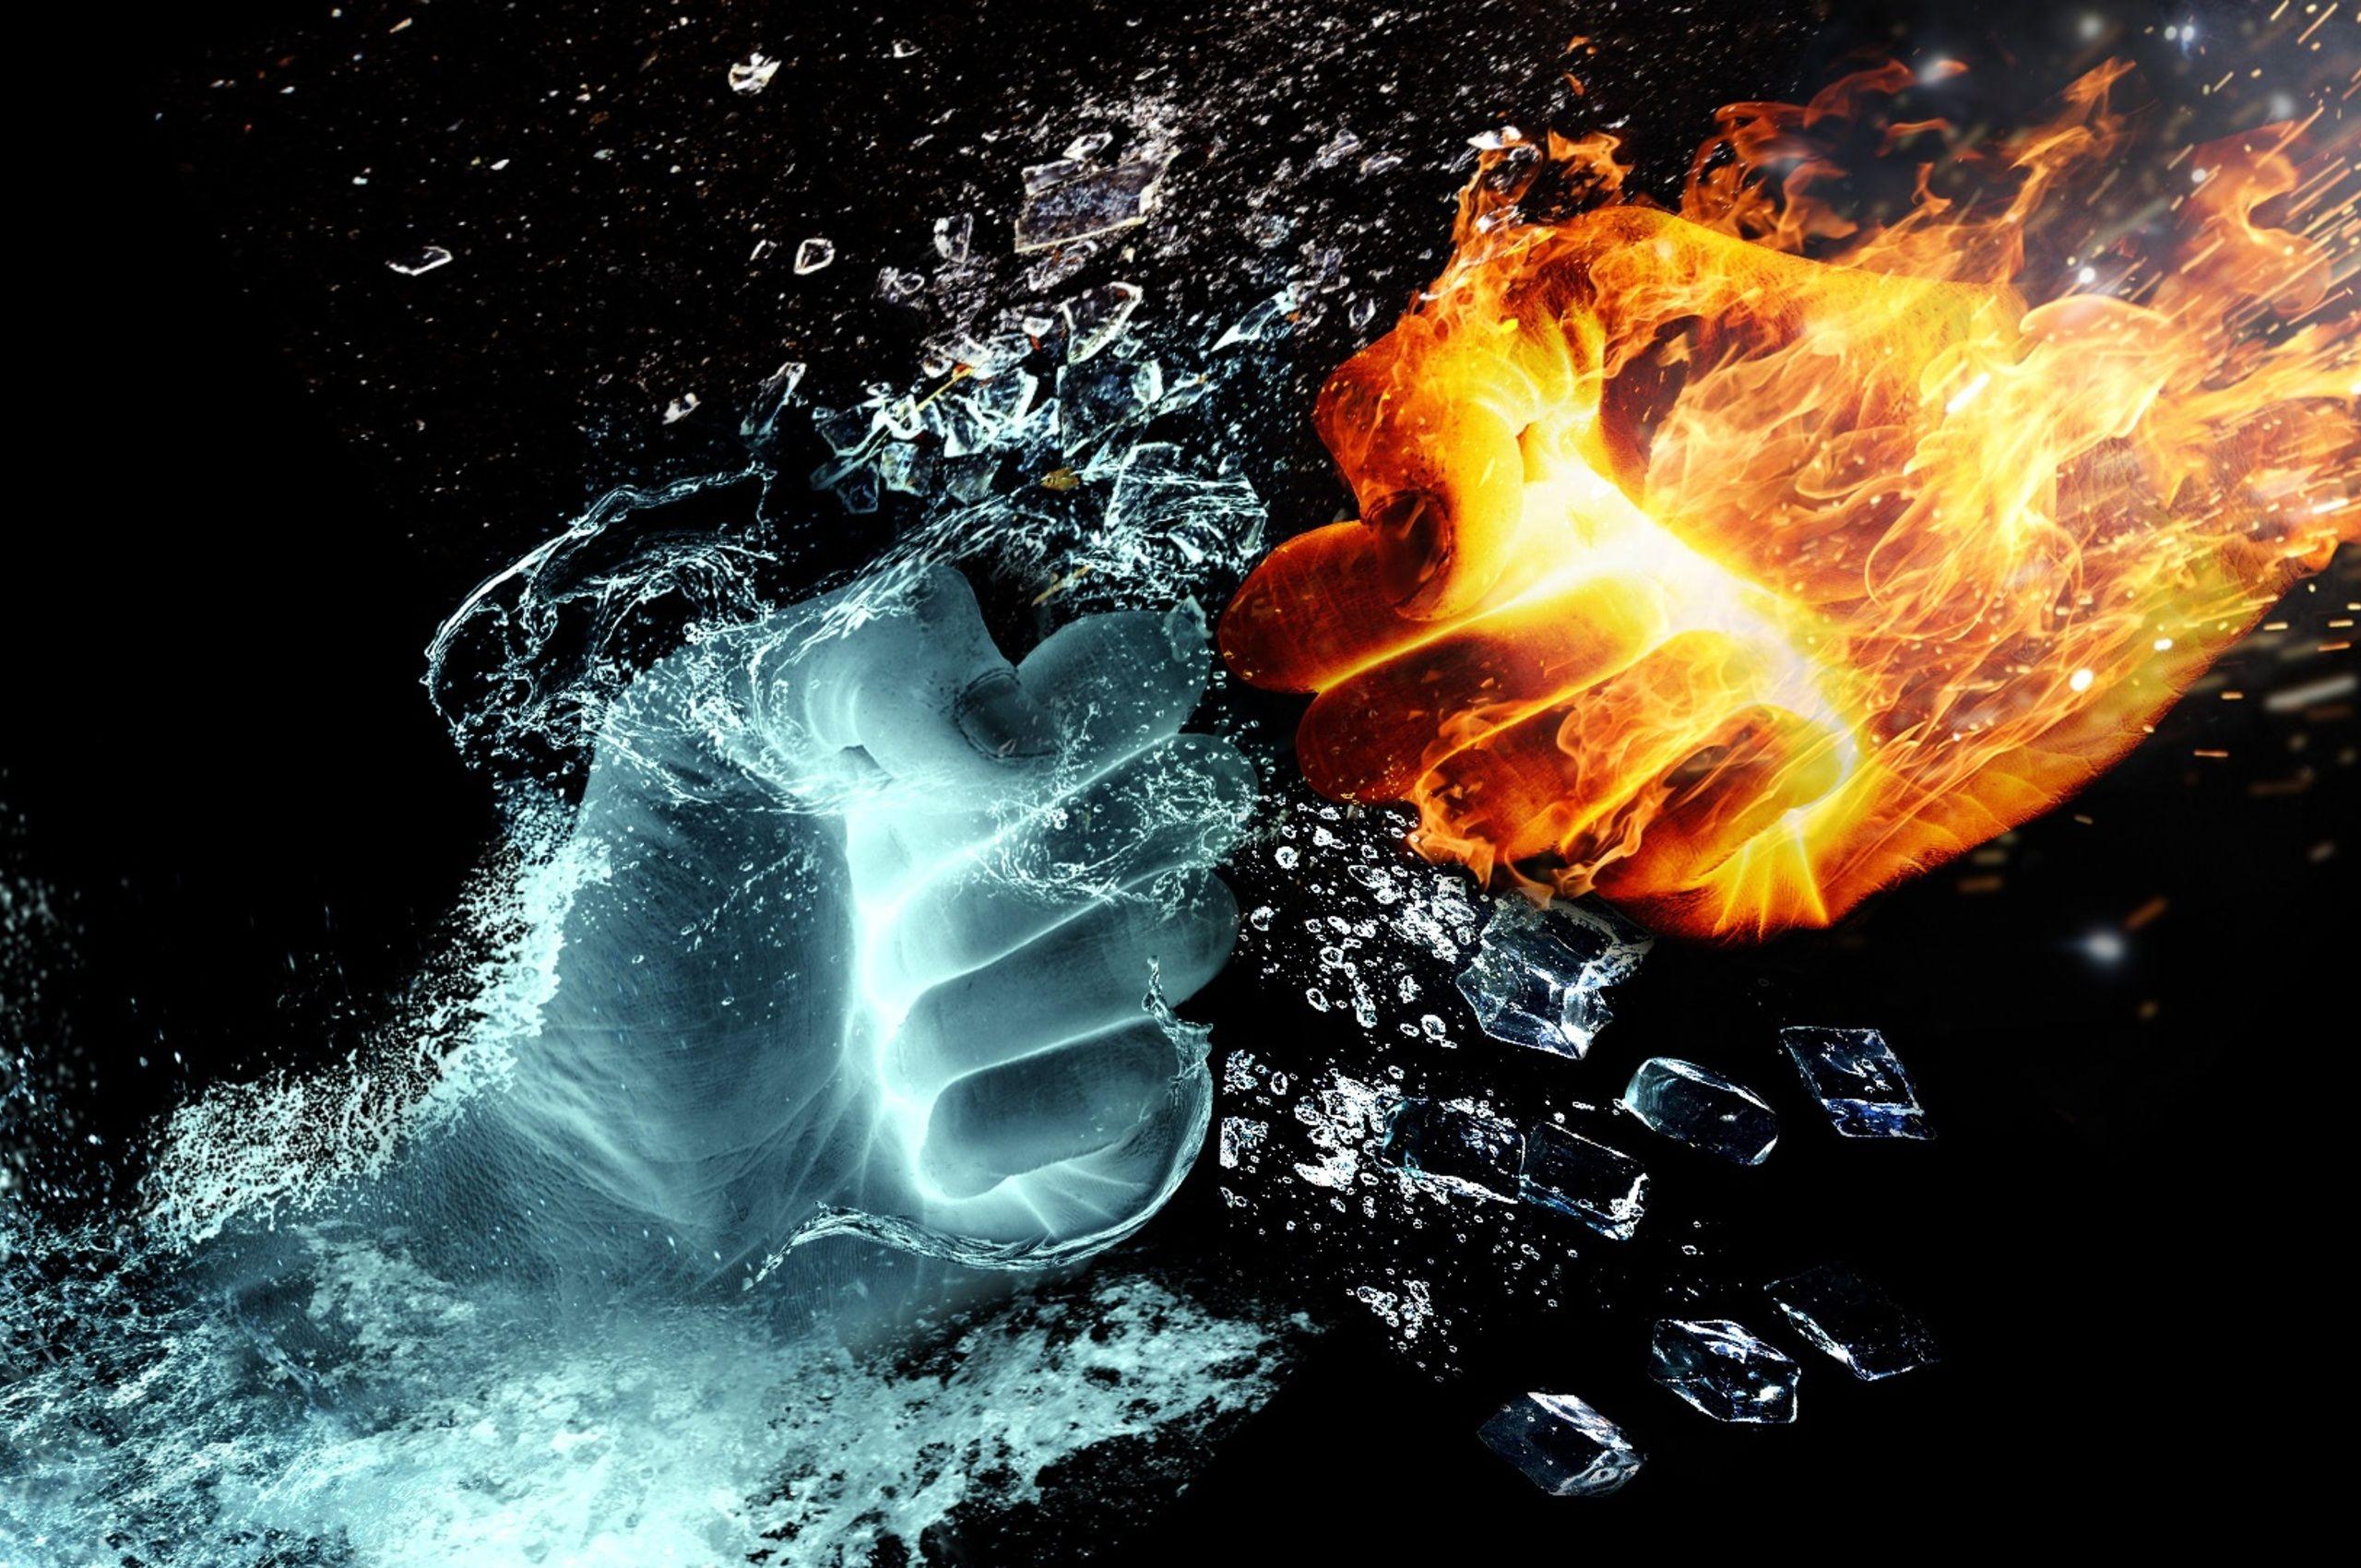 Ice Vs Fire Wallpapers Top Free Ice Vs Fire Backgrounds Wallpaperaccess